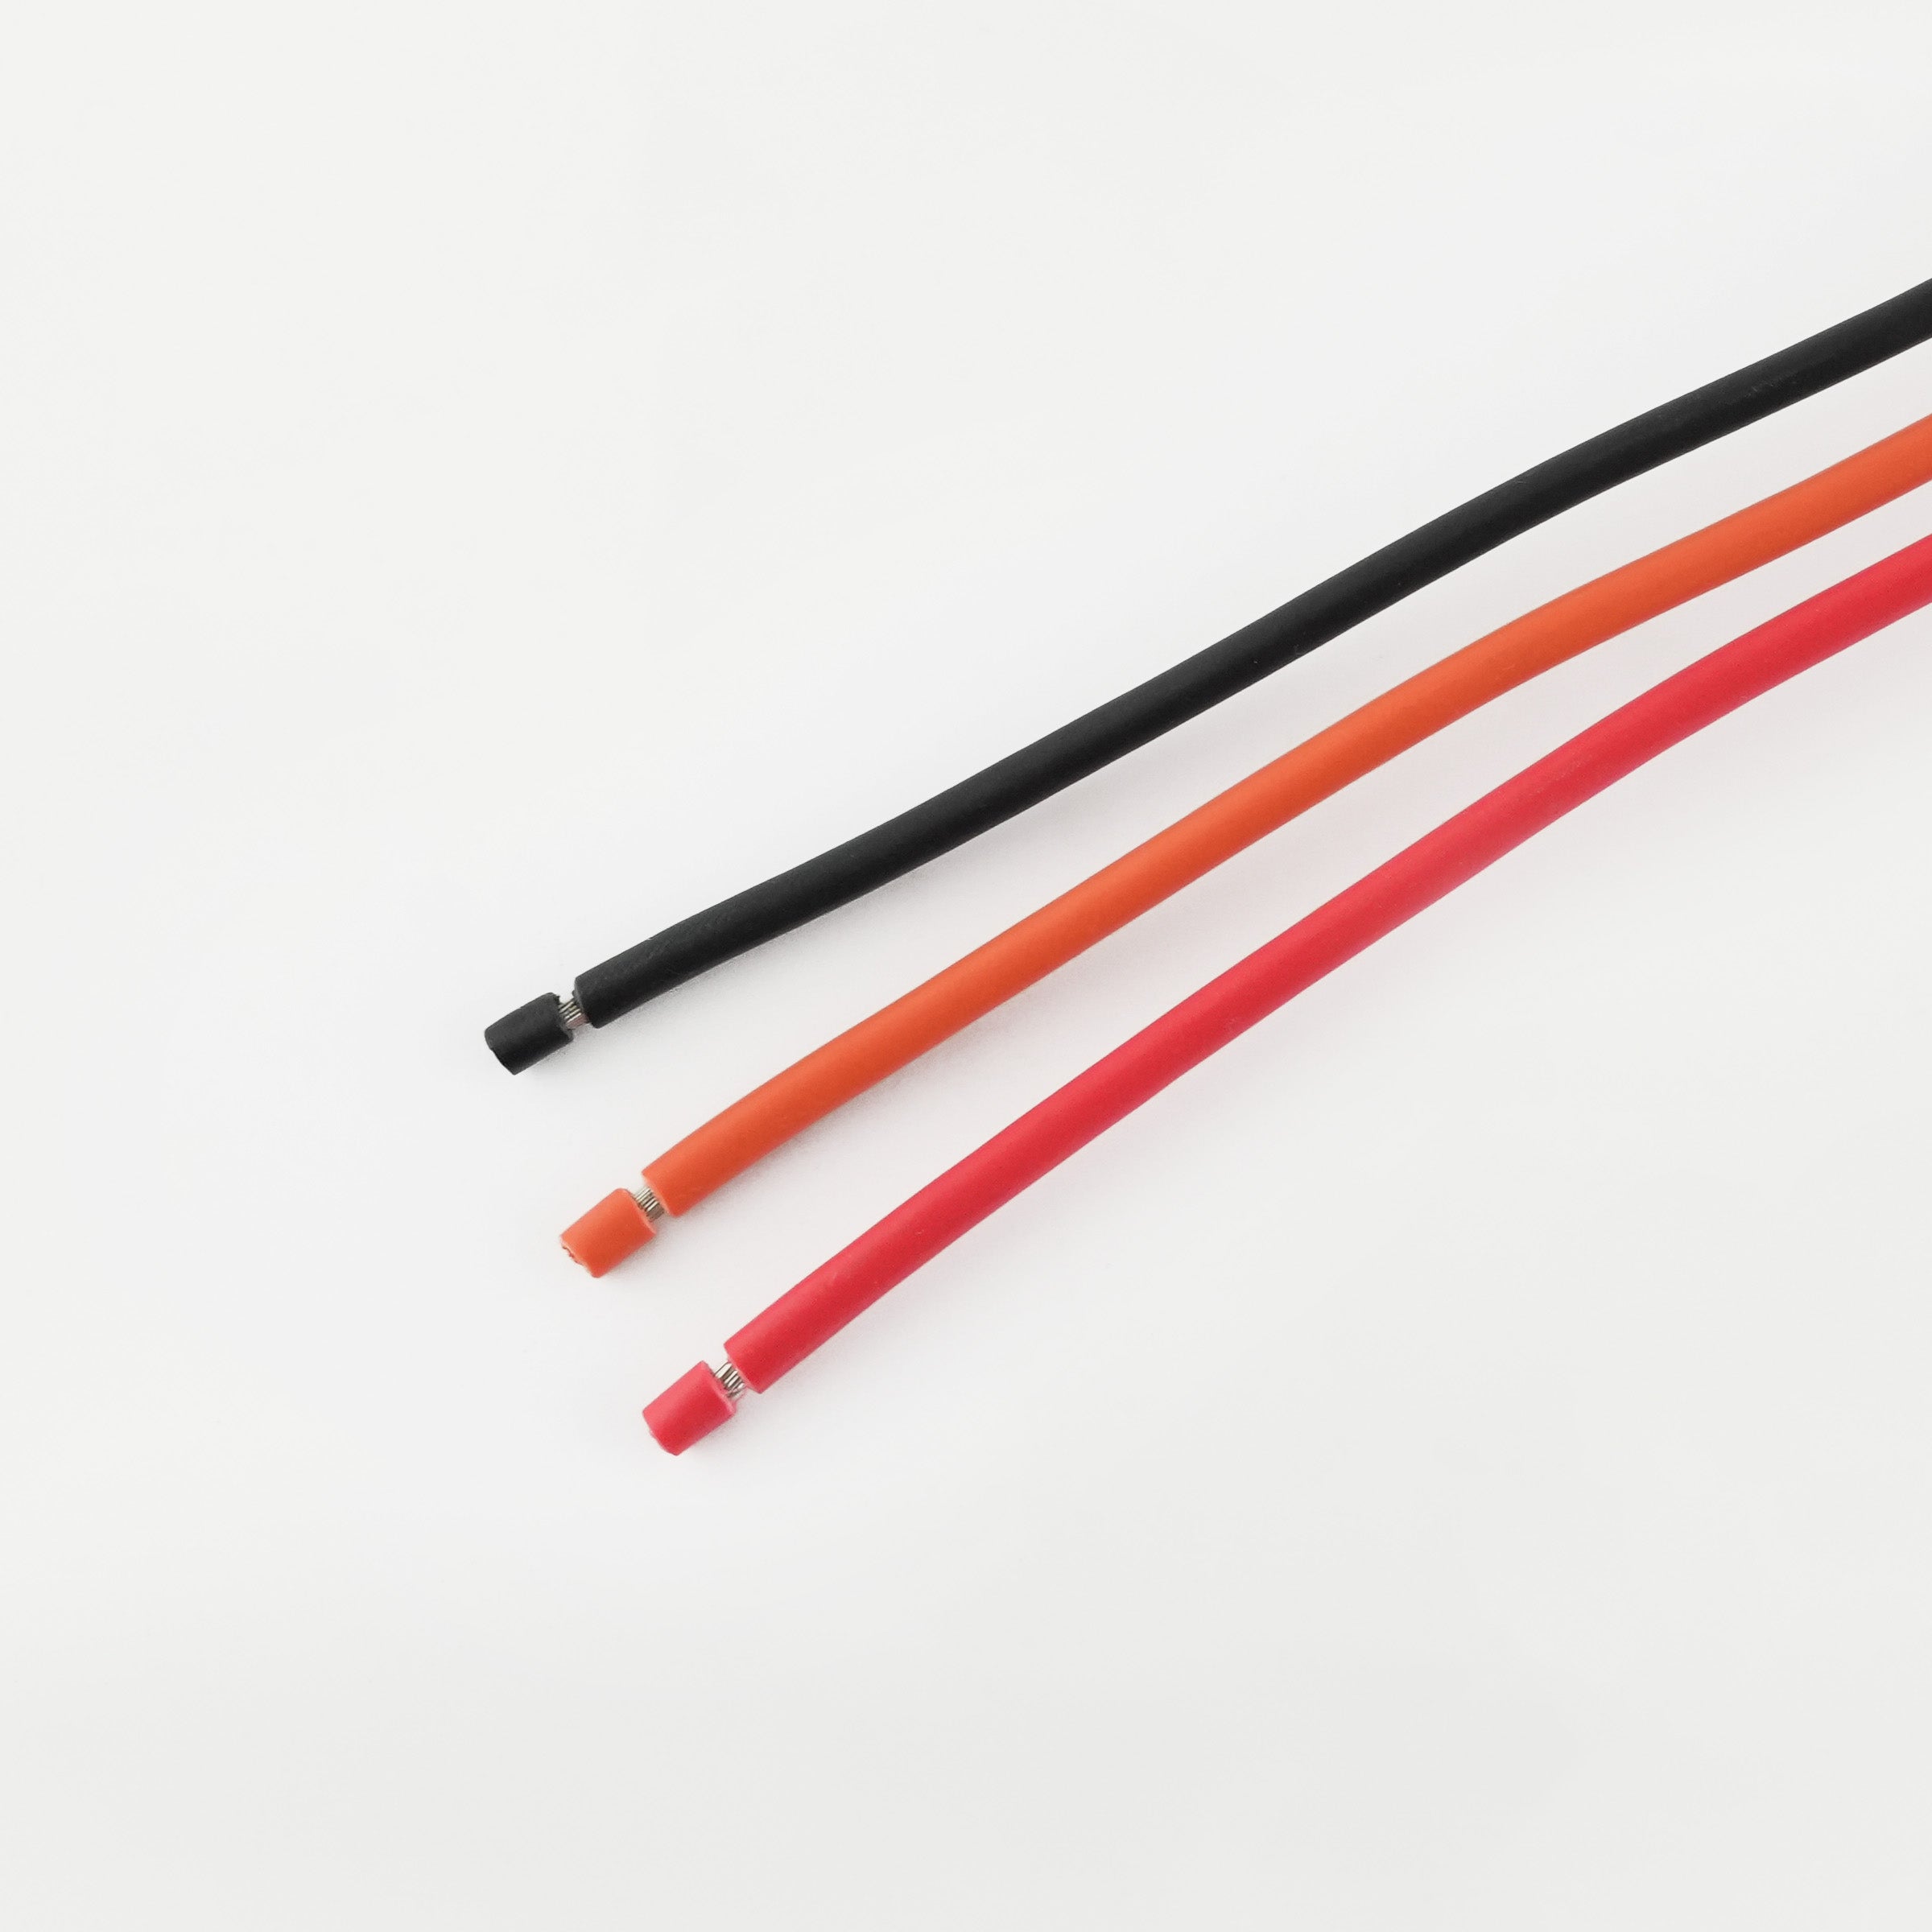 Polaris Pulse Busbar Pigtail Harness showing wire that wire colors follow suit with traditional Red – Constant +12V, Orange – Key On +12V, Black – Ground(Wire colors follow suit with traditional Red – Constant +12V, Orange – Key On +12V, Black – Ground)